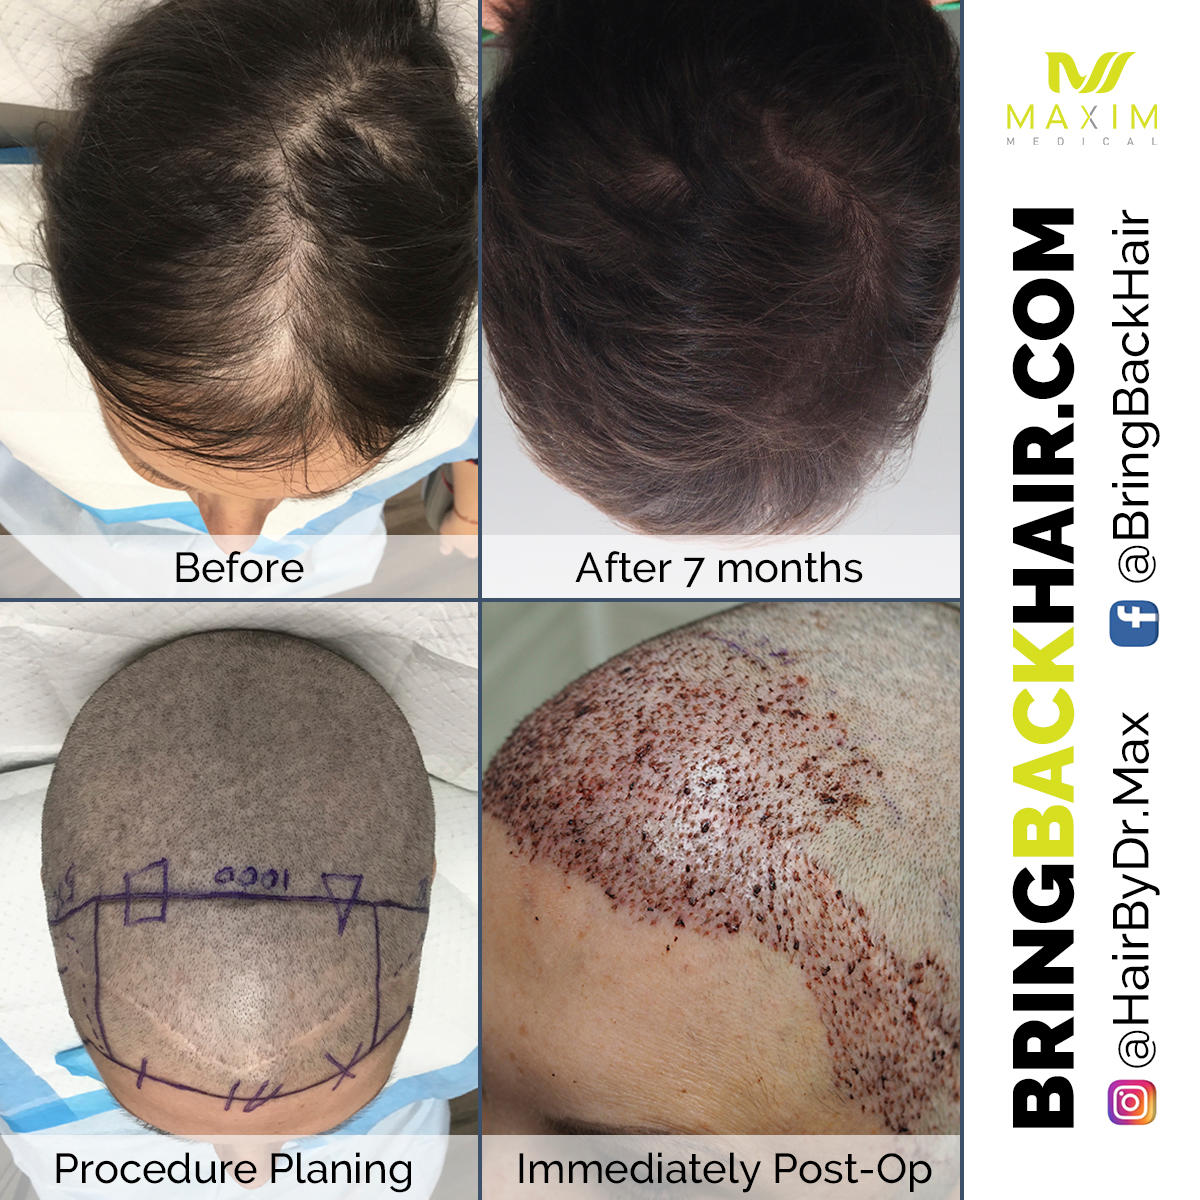 It’s time to invest in the new you!
ARTAS robotic technology delivers promising hair restoration in just a few months. Here are the results of one of our ARTAS patients who achieved their dream results after undergoing the procedure. 
Take the first step towards natural, permanent hair today! Give us a call for a free consultation: (833) MOR-HAIR
(833) 667-4247